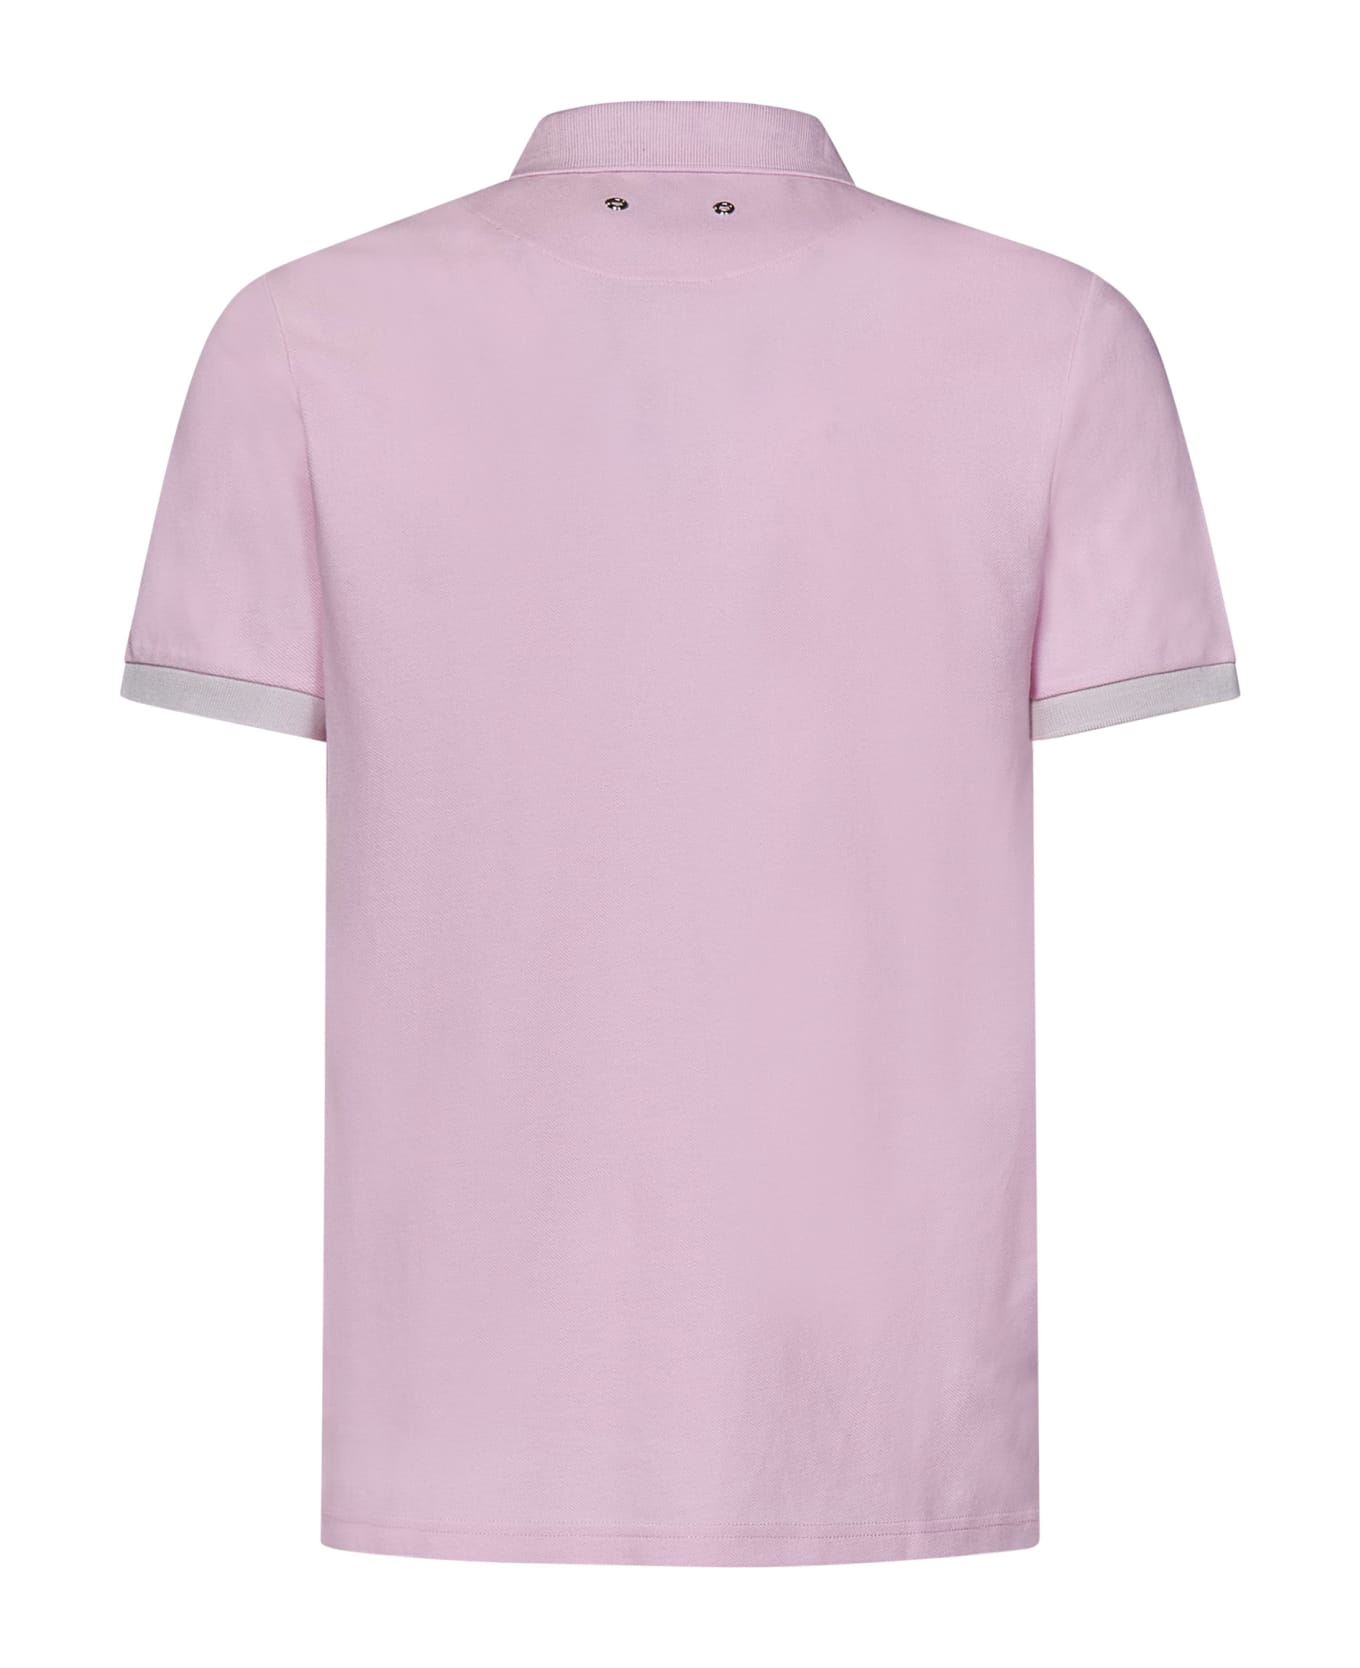 Vilebrequin Polo Shirt - Pink ポロシャツ